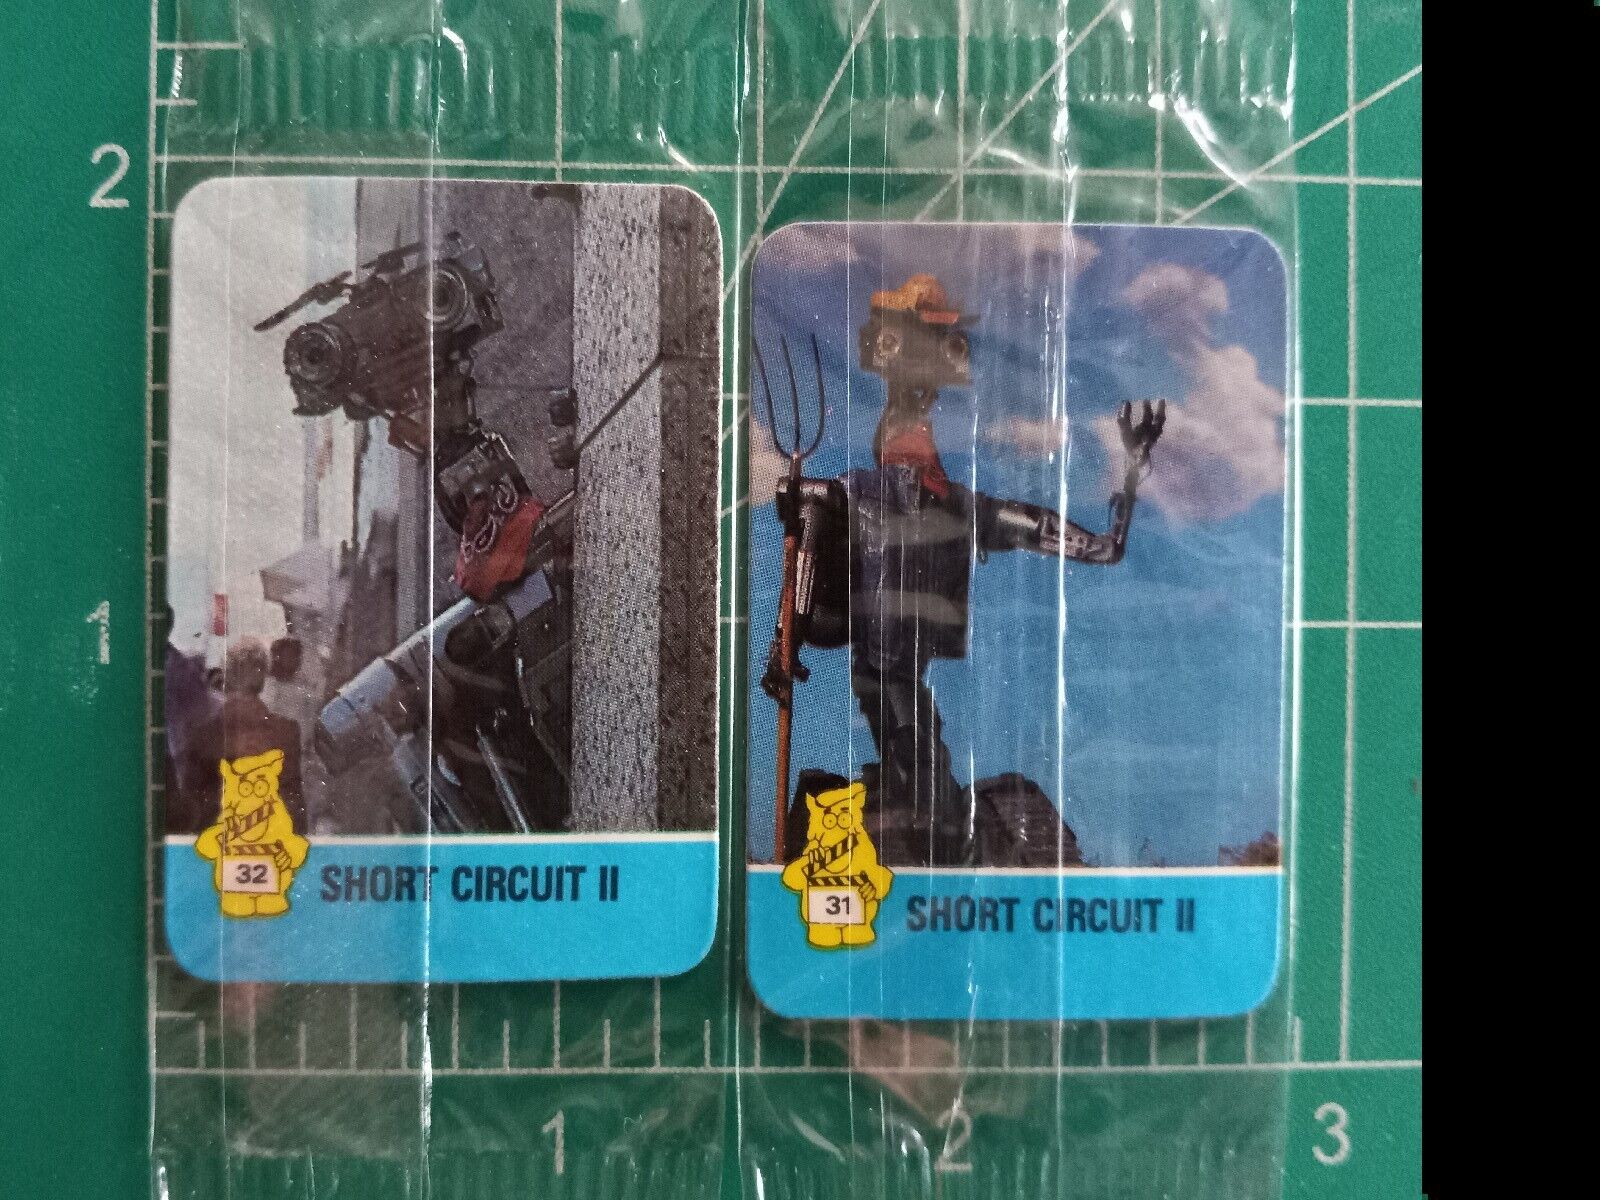 (2) 1988 HOSTESS movie actor card SHORT CIRCUIT II NUMBER 5